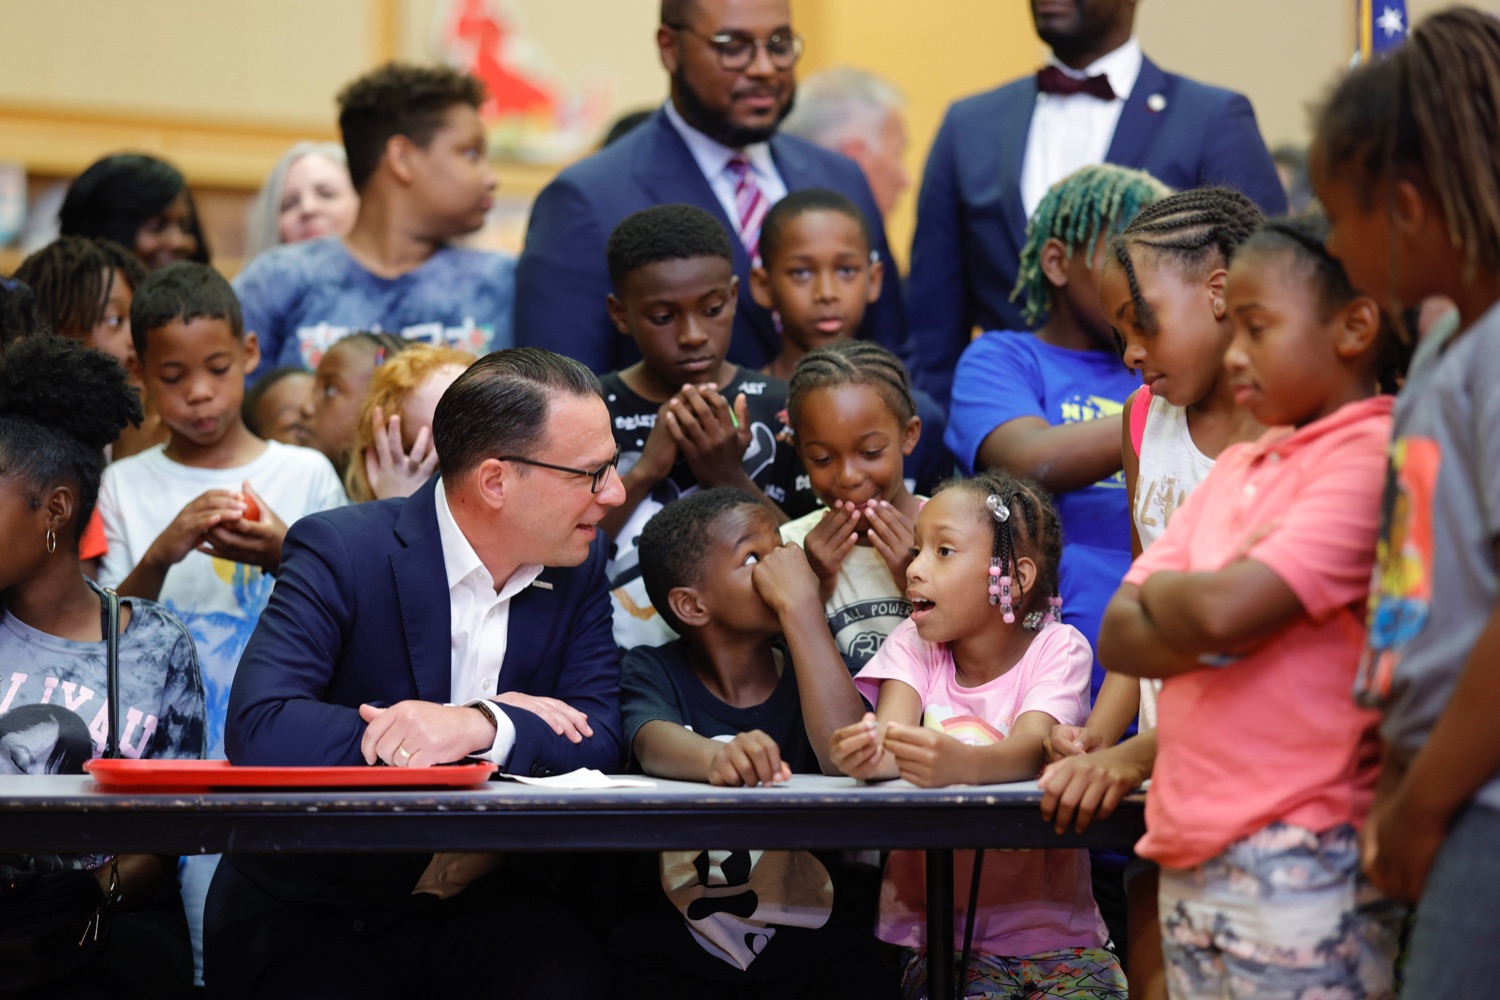 Governor Shapiro Signs Ceremonial Budget Bill Creating Universal Free Breakfast, Making Historic Investments in Public Education During Visit to Allegheny County Elementary School on August 8, 2023.<br><a href="https://filesource.amperwave.net/commonwealthofpa/photo/23563_Gov_Education_DZ_003.JPEG" target="_blank">⇣ Download Photo</a>